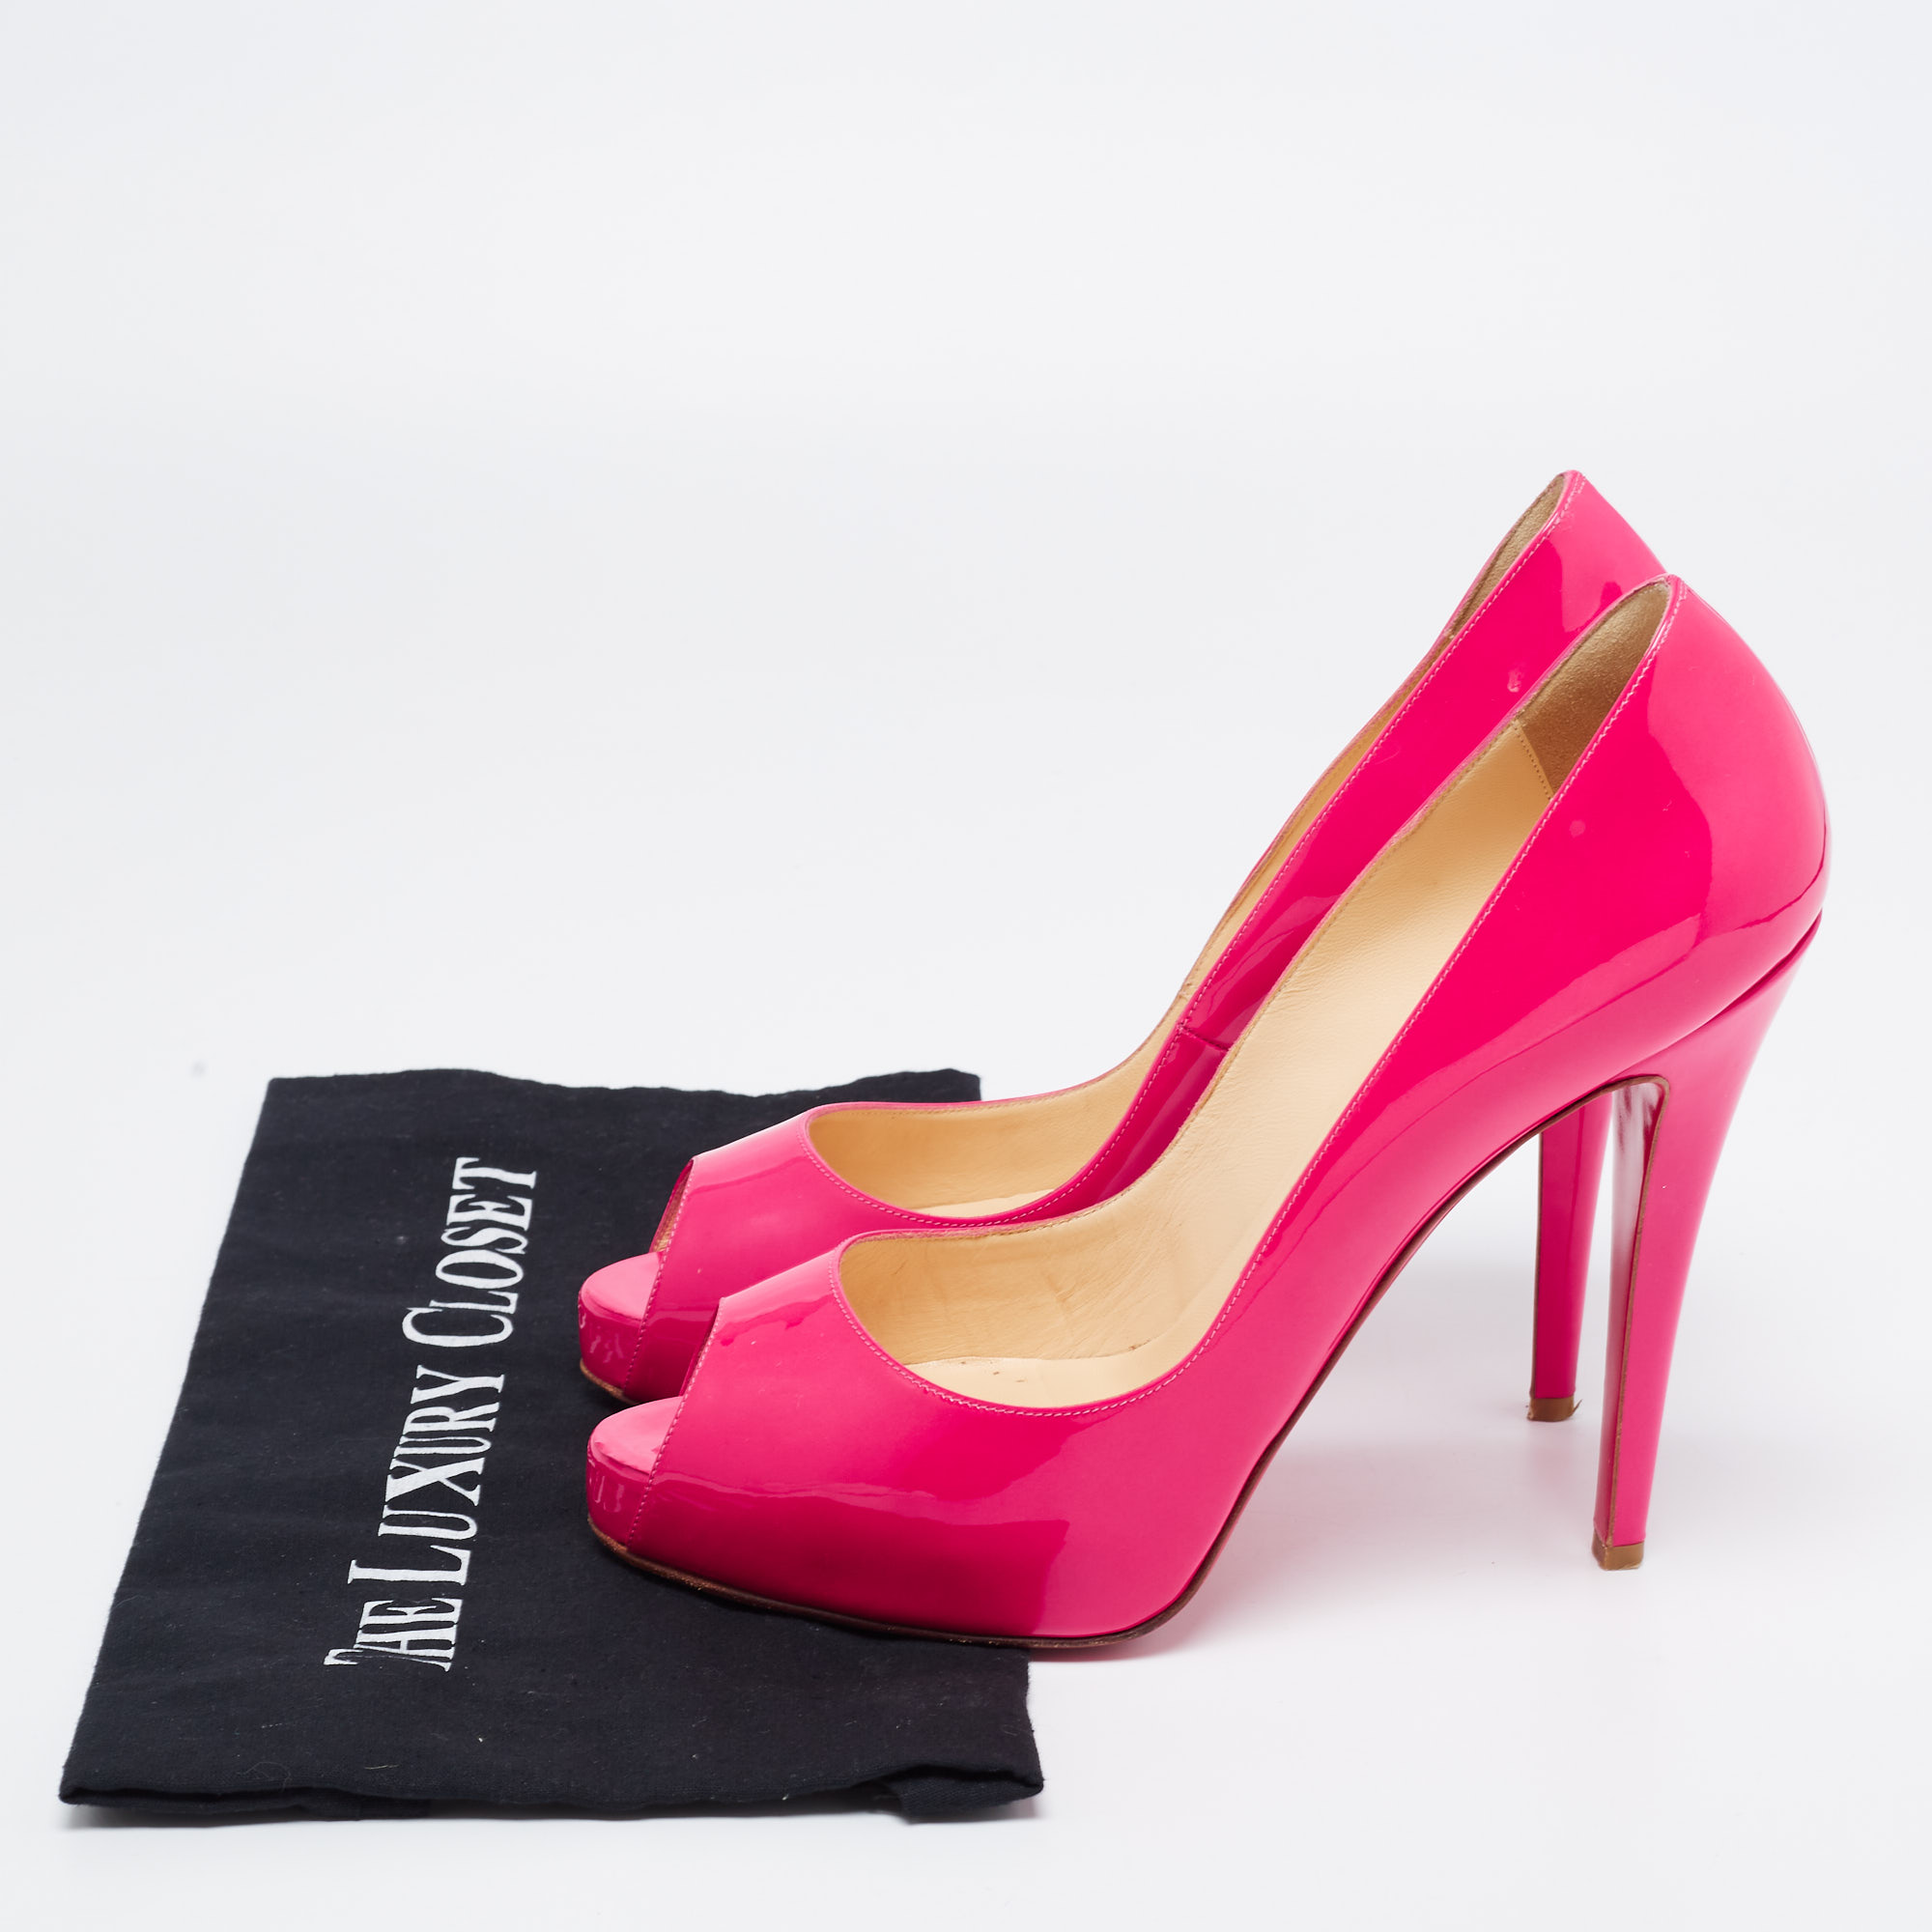 Christian Louboutin Pink Patent Leather New Very Prive Peep Toe Platform Pumps Size 41